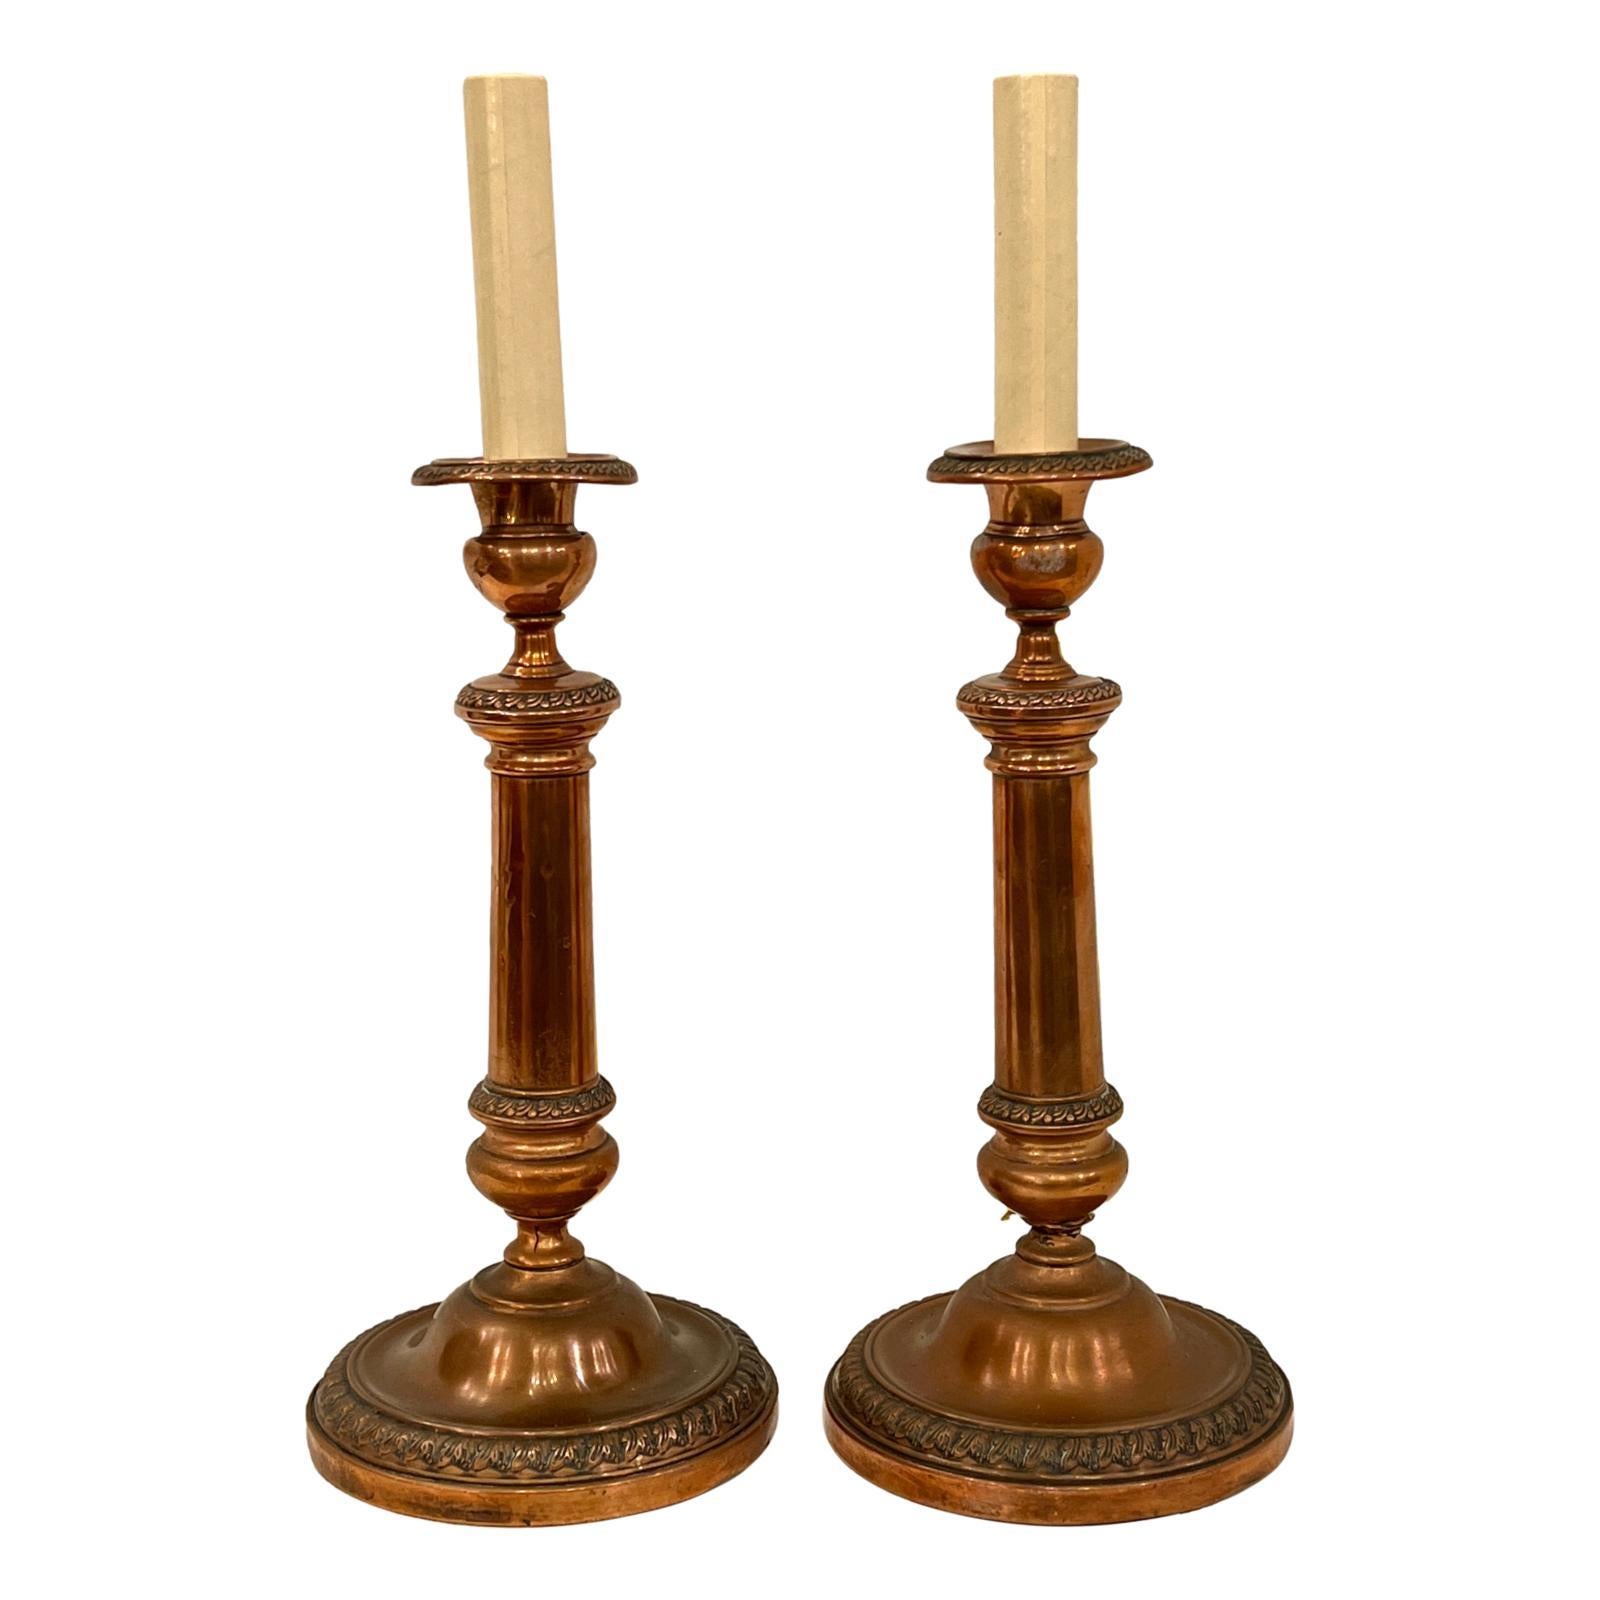 A pair of circa 1900 English copper candlestick table lamps.

Measurements:
Height of body: 11.5